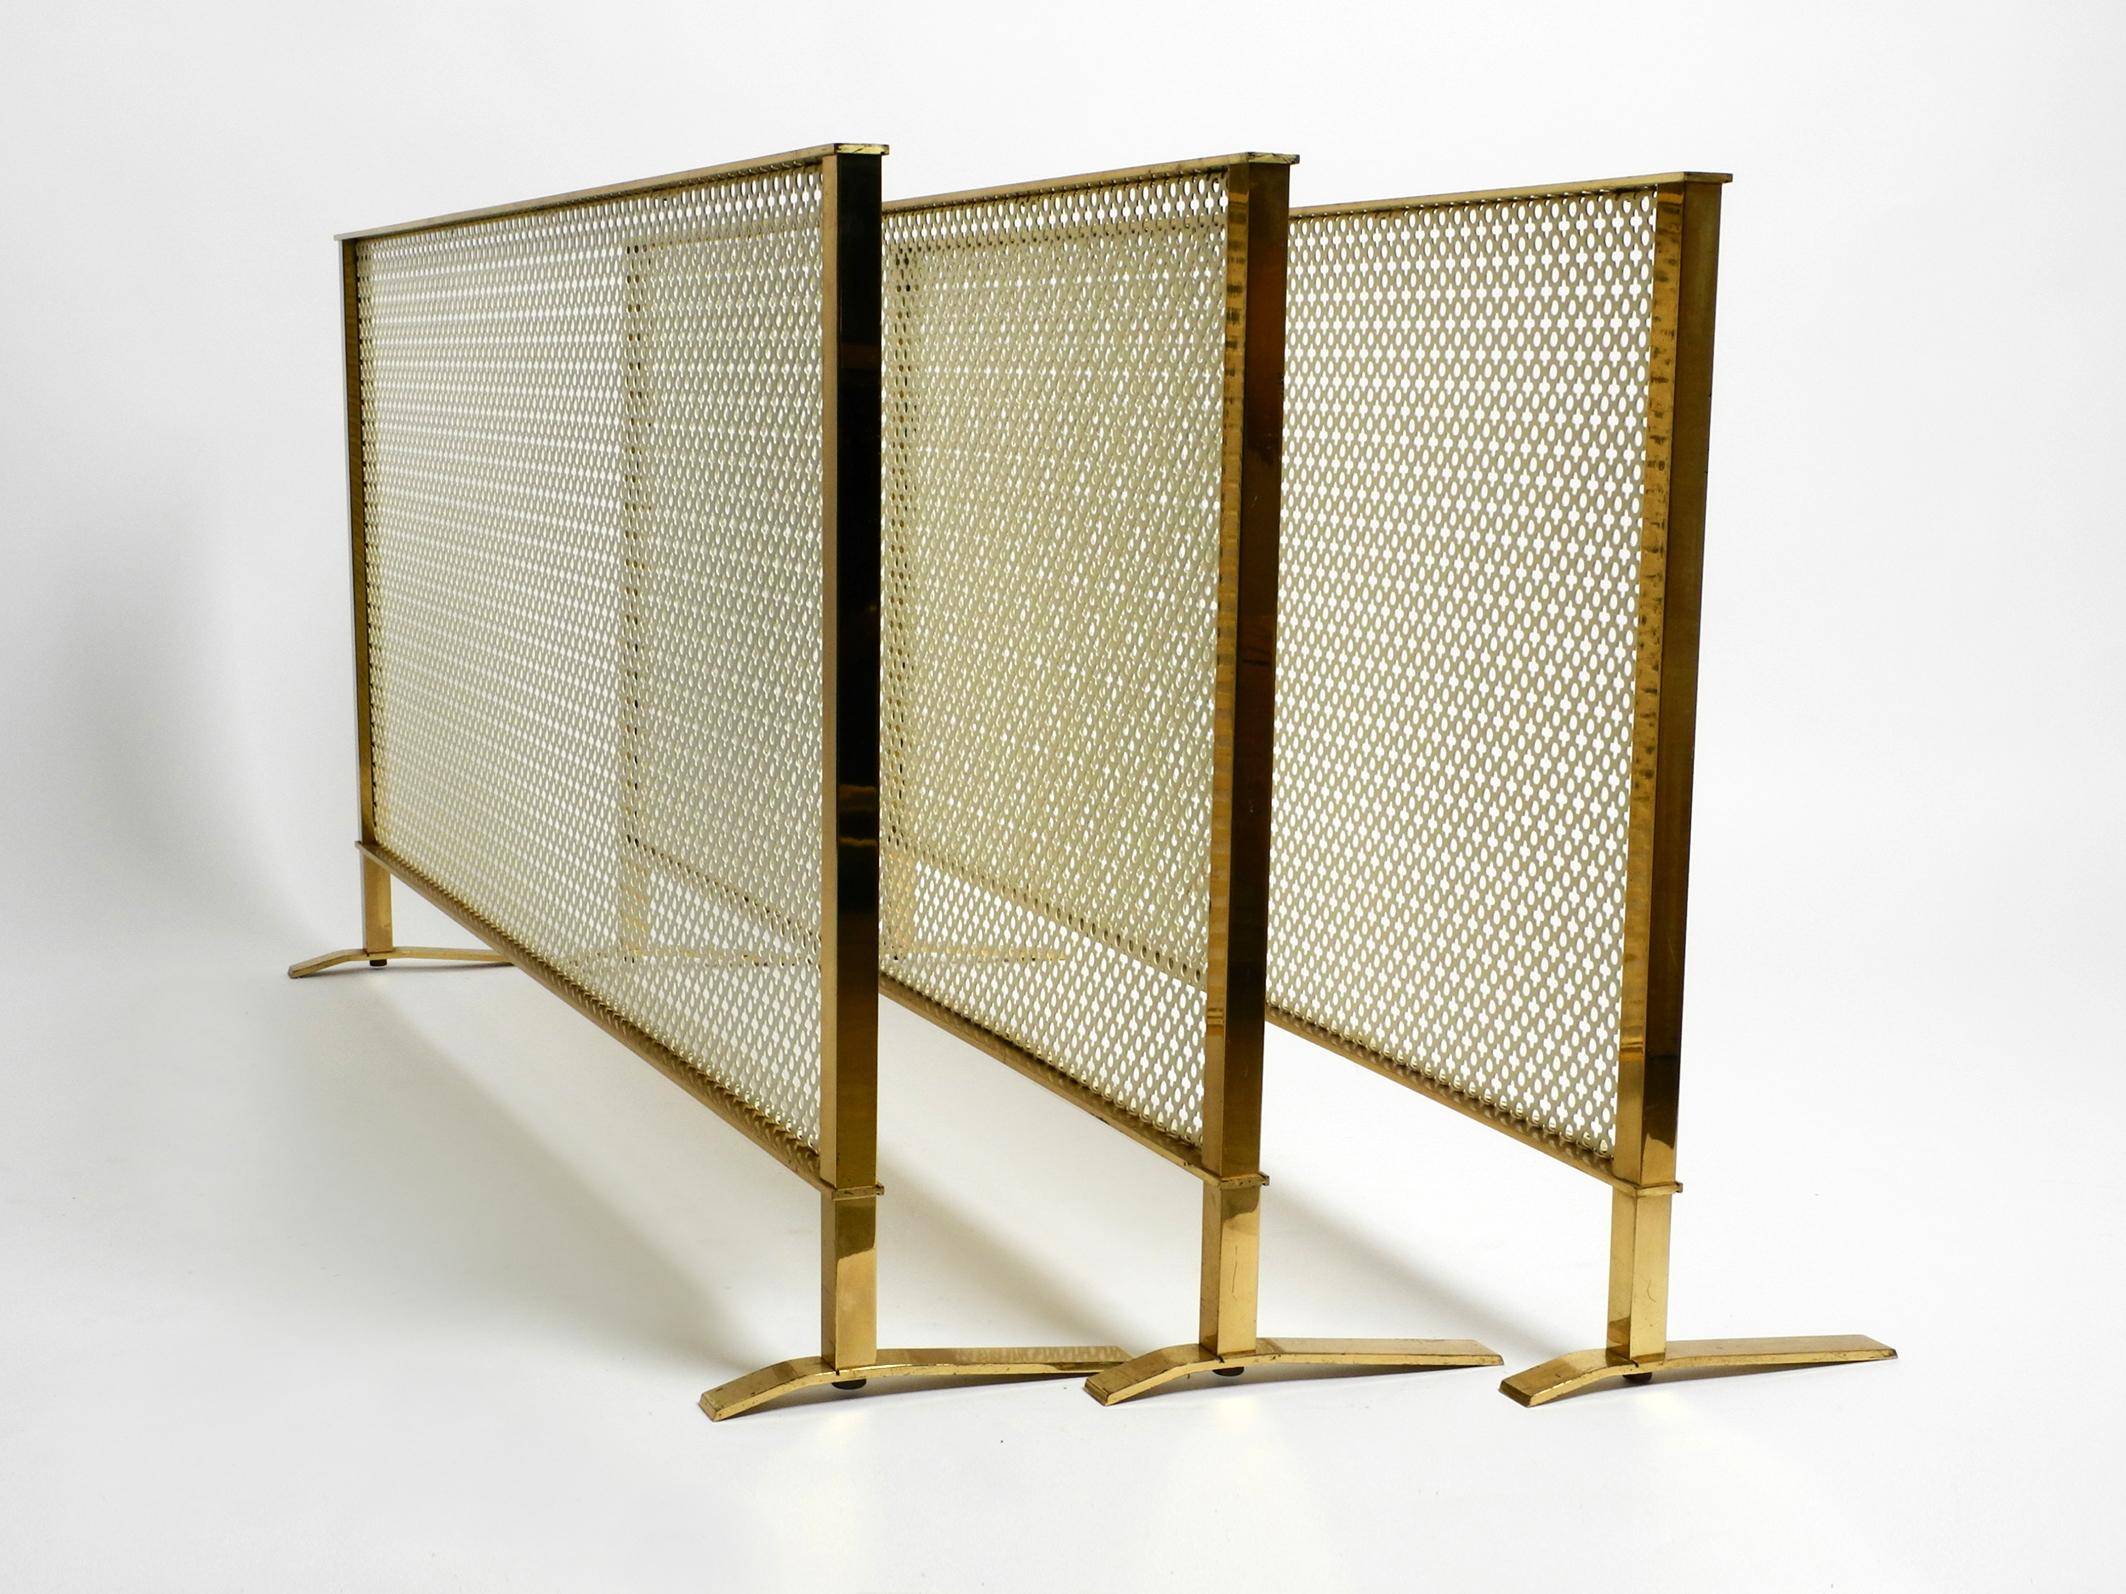 Beautiful mid century radiator covering or fireplace screen made of brass 
and perforated sheet metal by Vereinigte Werkstätten.
Great, very elegant design. Made in Germany.
Frame and feet are made of shiny brass, cover in the middle is made of